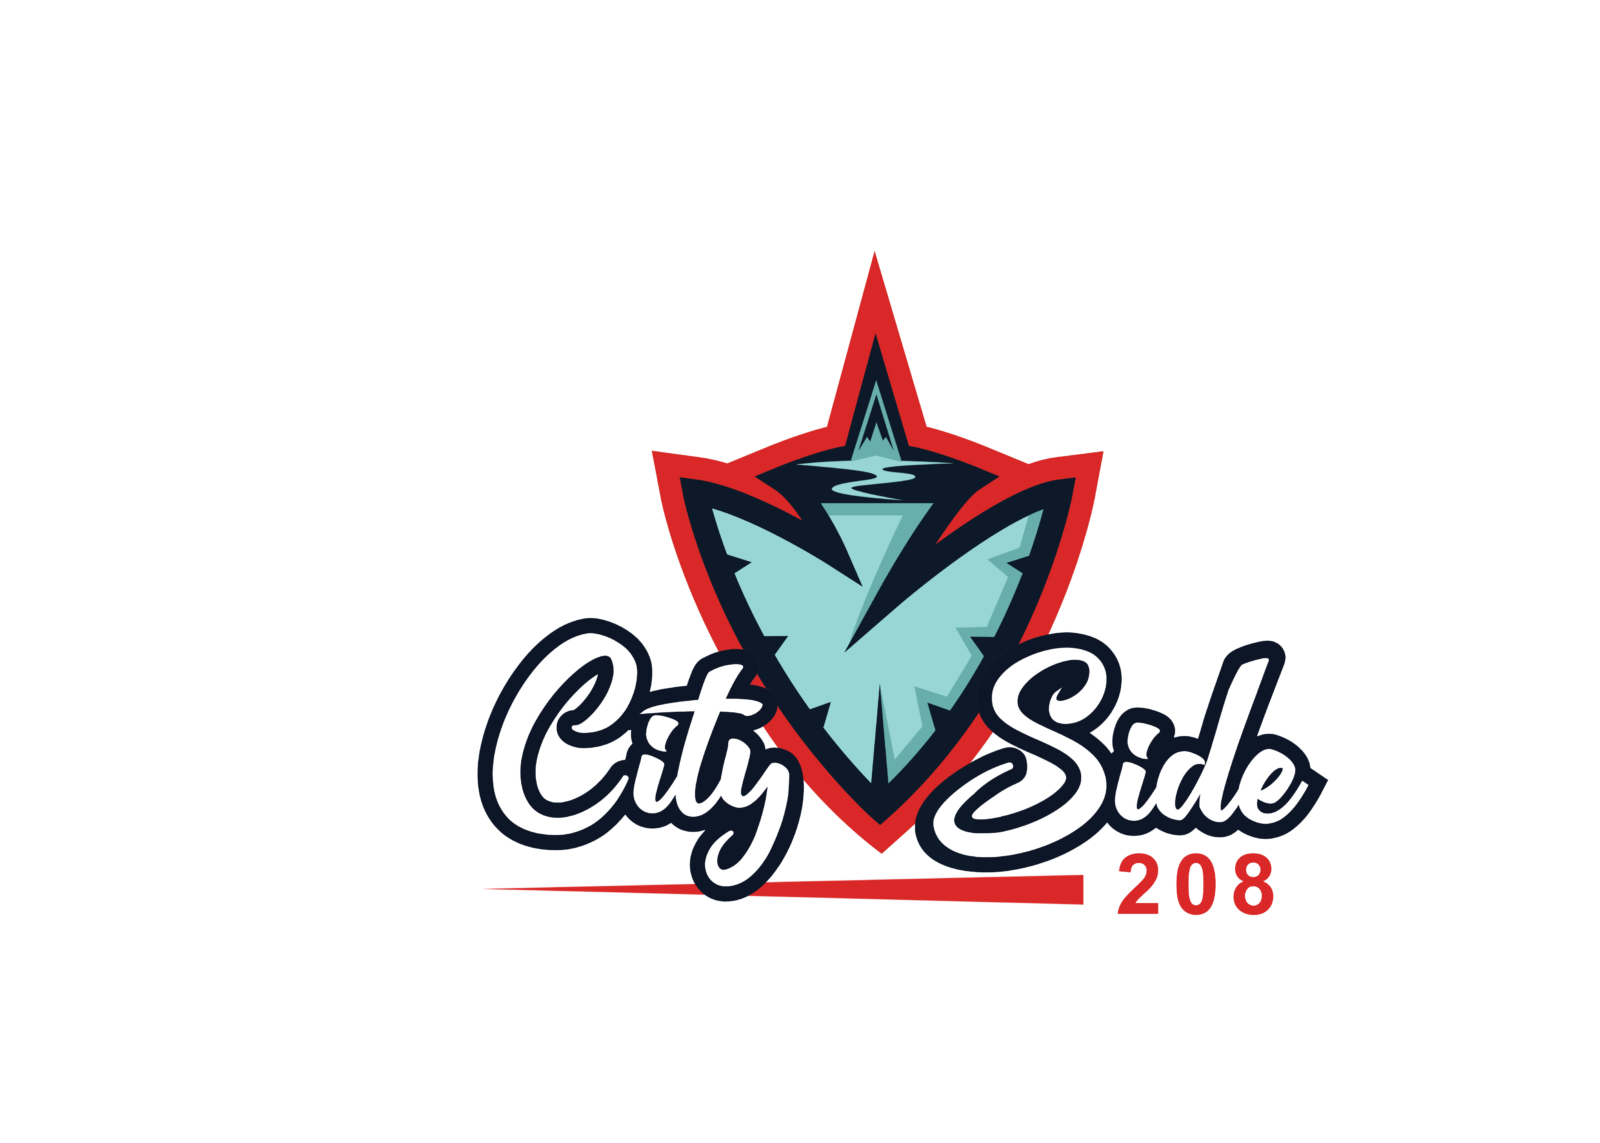 CitySide 208 | Lacrosse | Boise, Eagle, Meridian, Idaho | Treasure Valley - Boost your lacrosse skills and conquer the game with our top-rated club lacrosse teams operating in the Treasure Valley (Idaho), practices are in Boise, Meridian, and Eagle